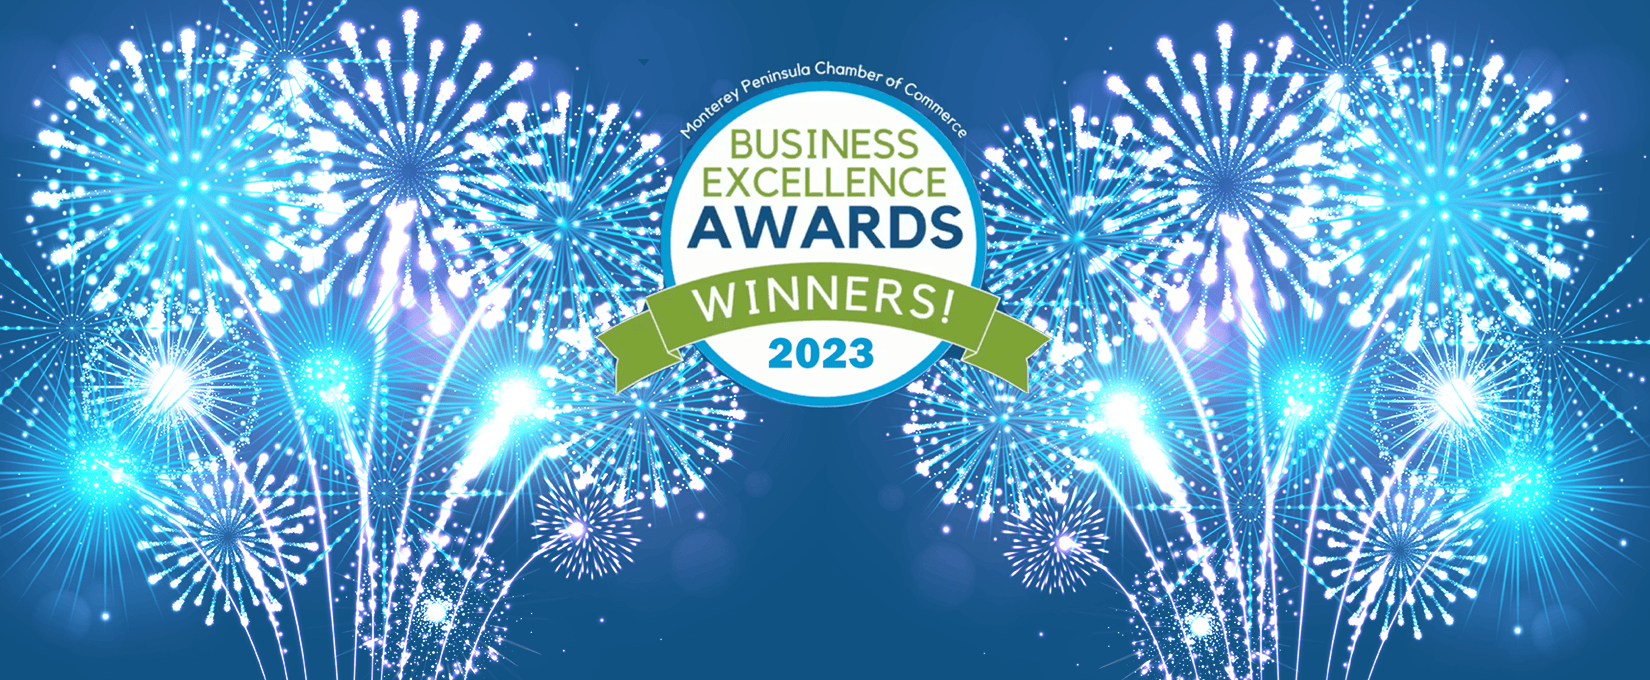 Business Excellence Award 2023